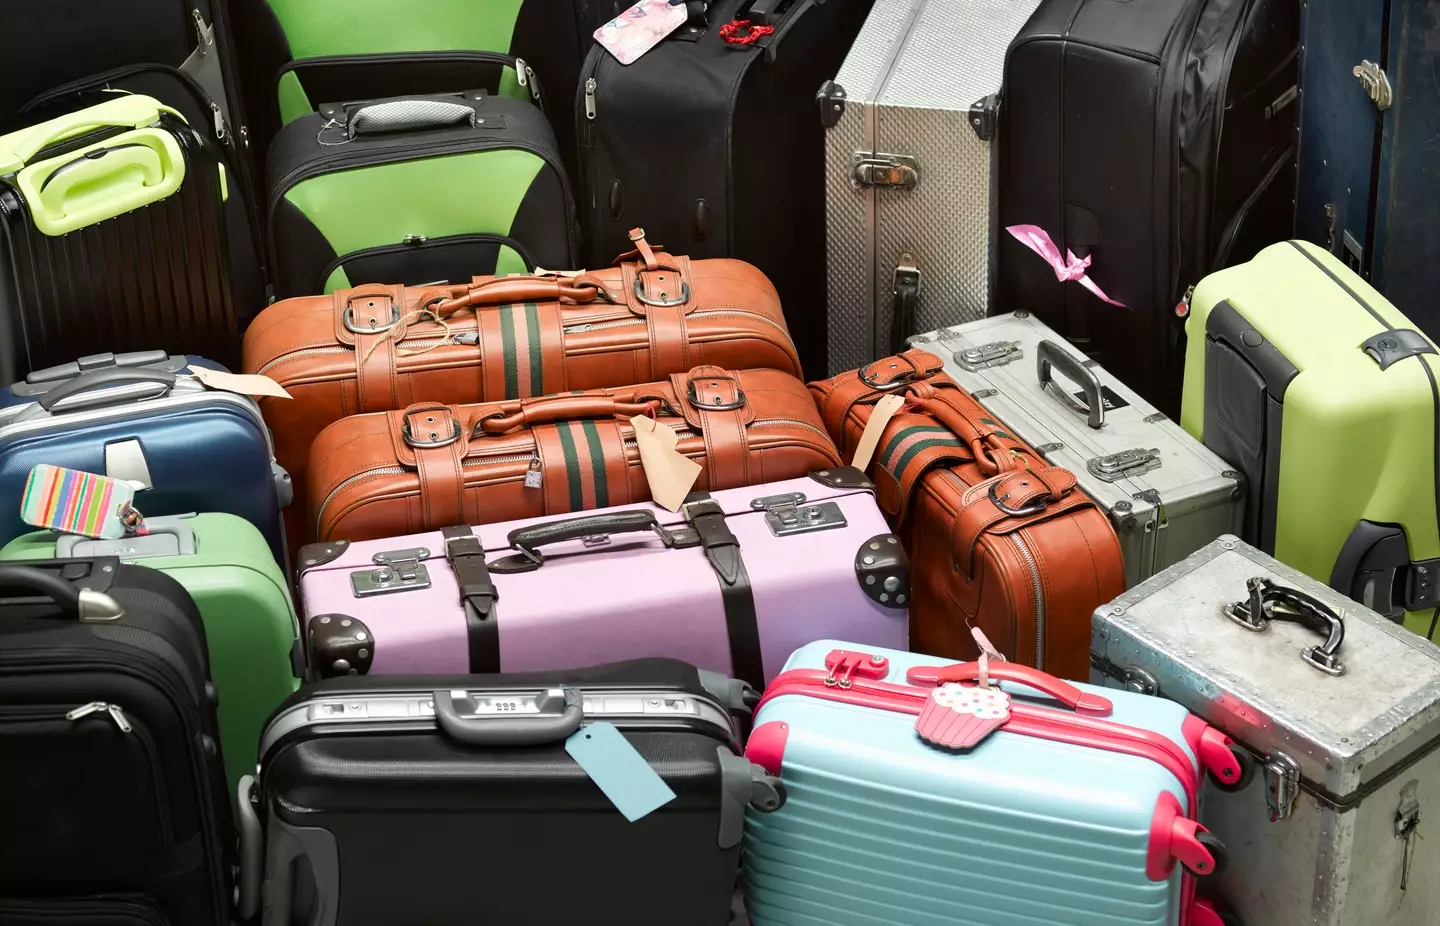 So. Many. Suitcases. (Getty Stock Image)